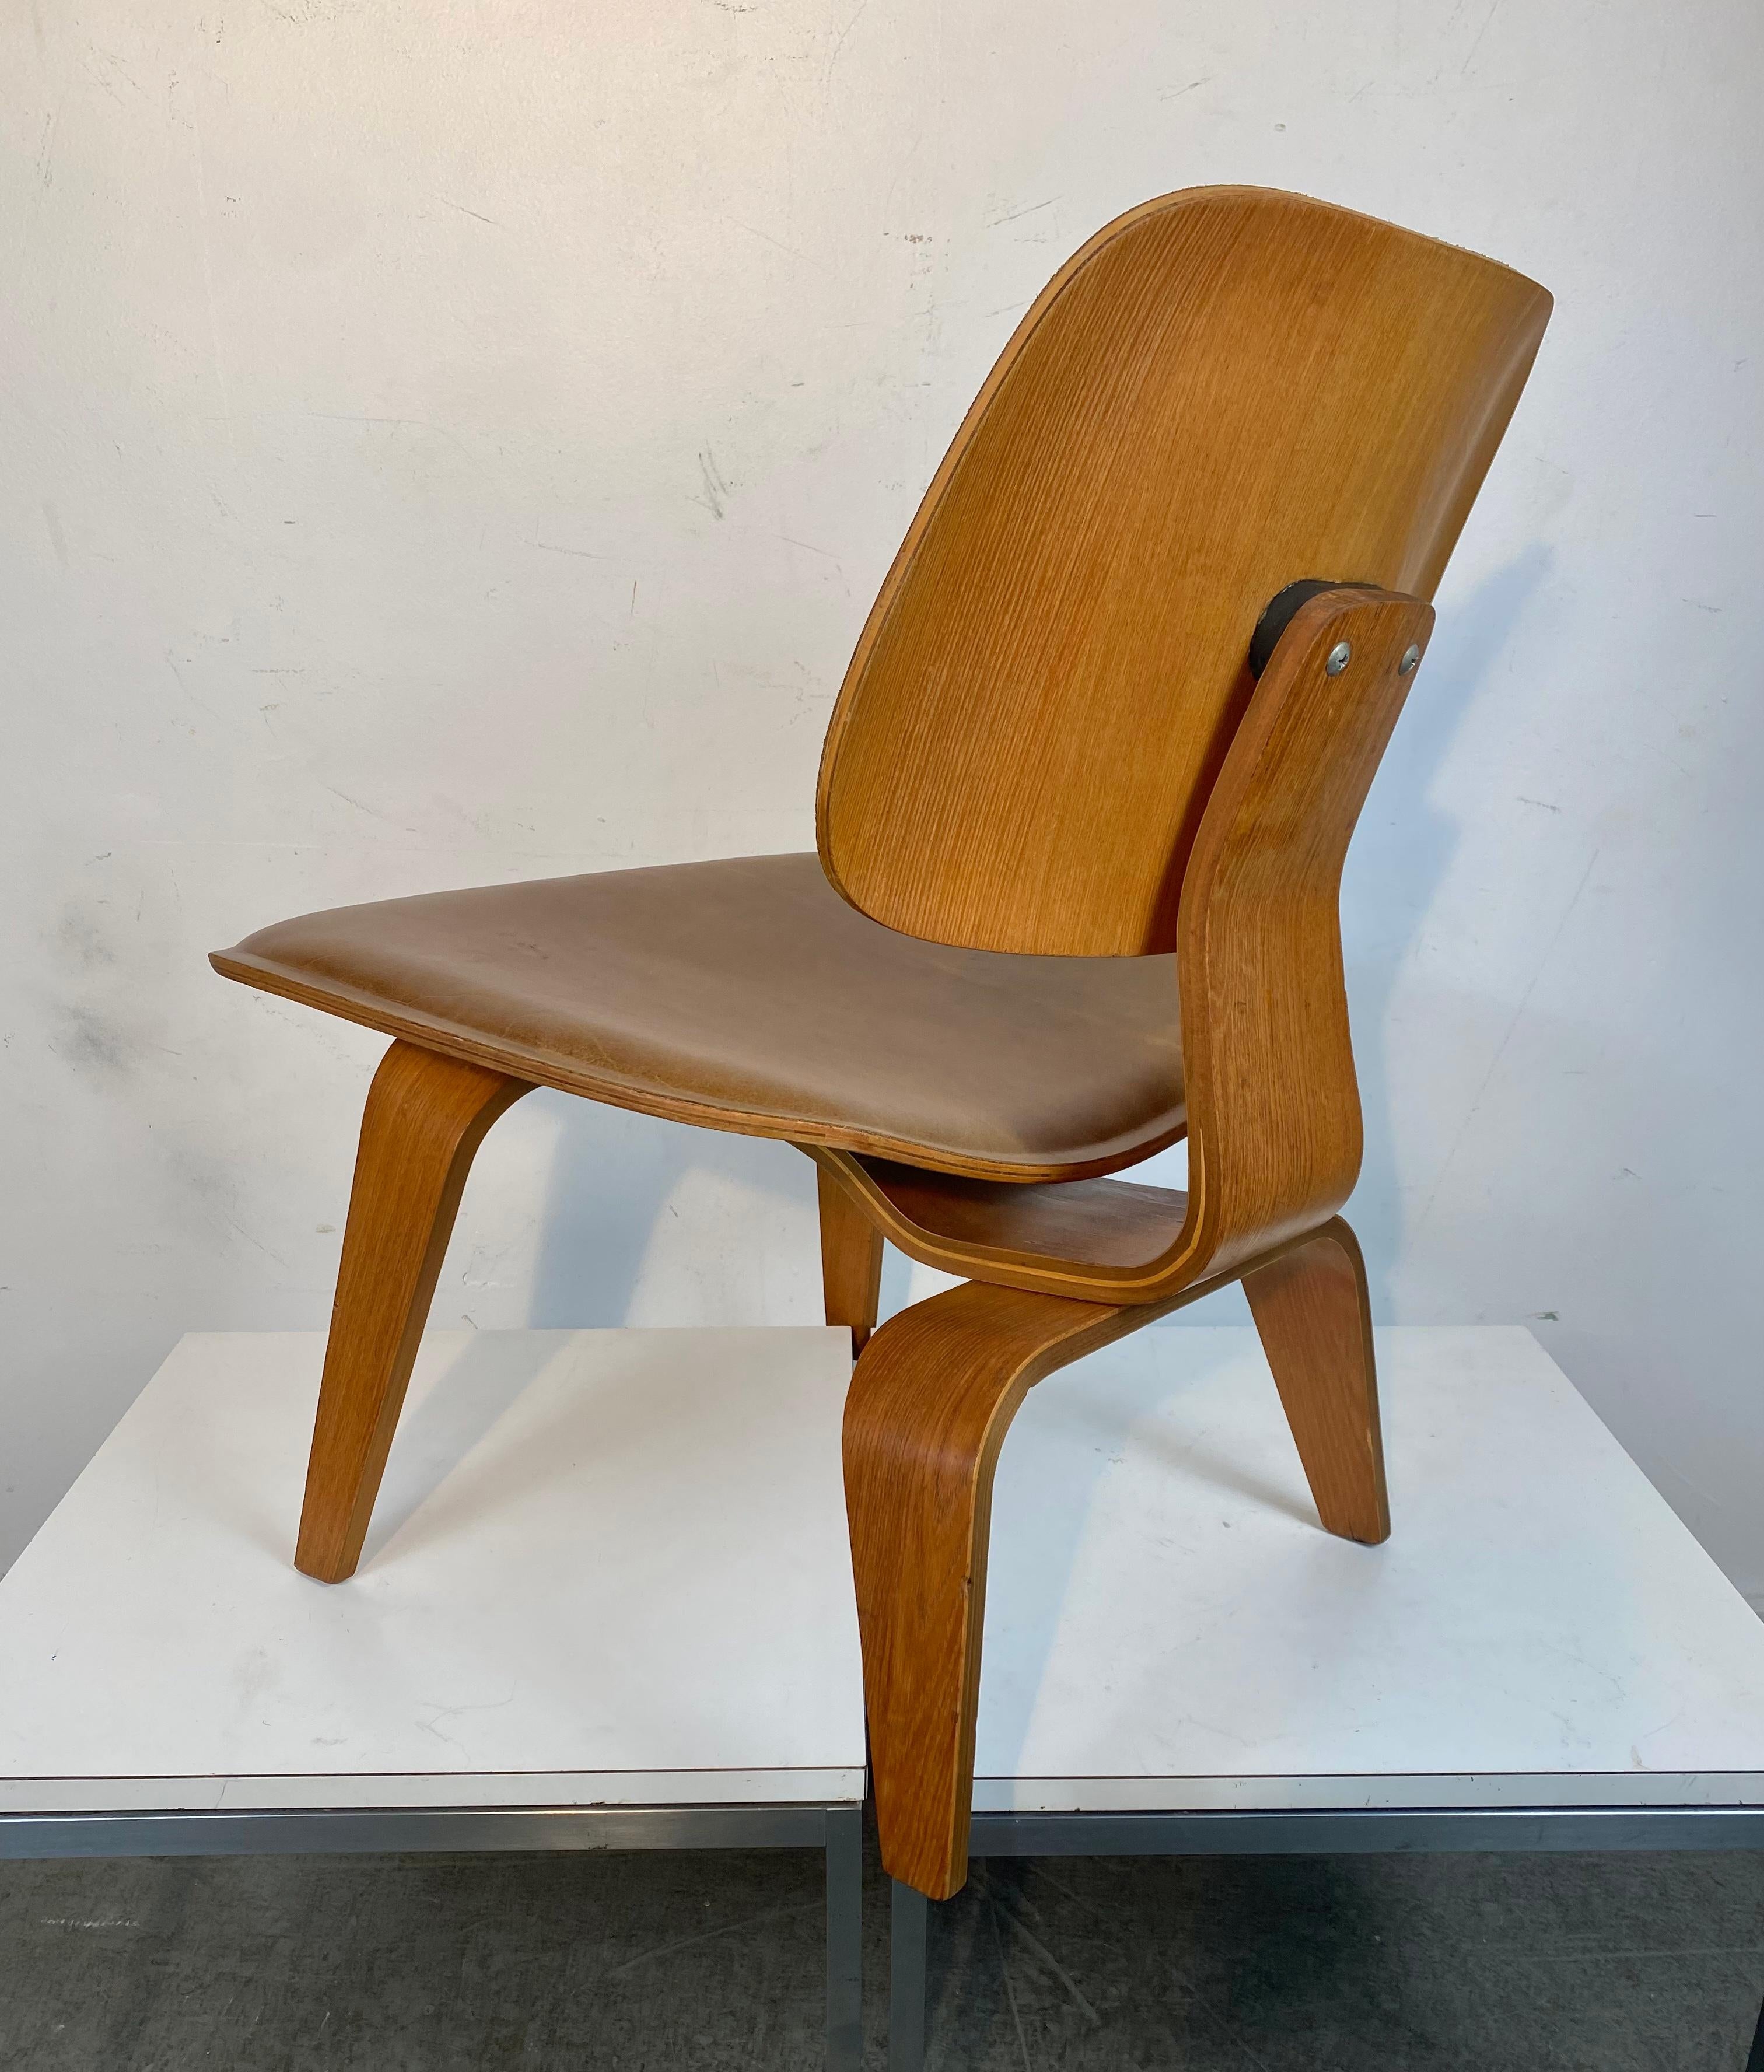 An exceptional original LCW in factory leather for Herman Miller, 

These upholstered examples are very rare as they were only available for sale as a special order for five years between 1948-1953.

This examples in incredible condition with a